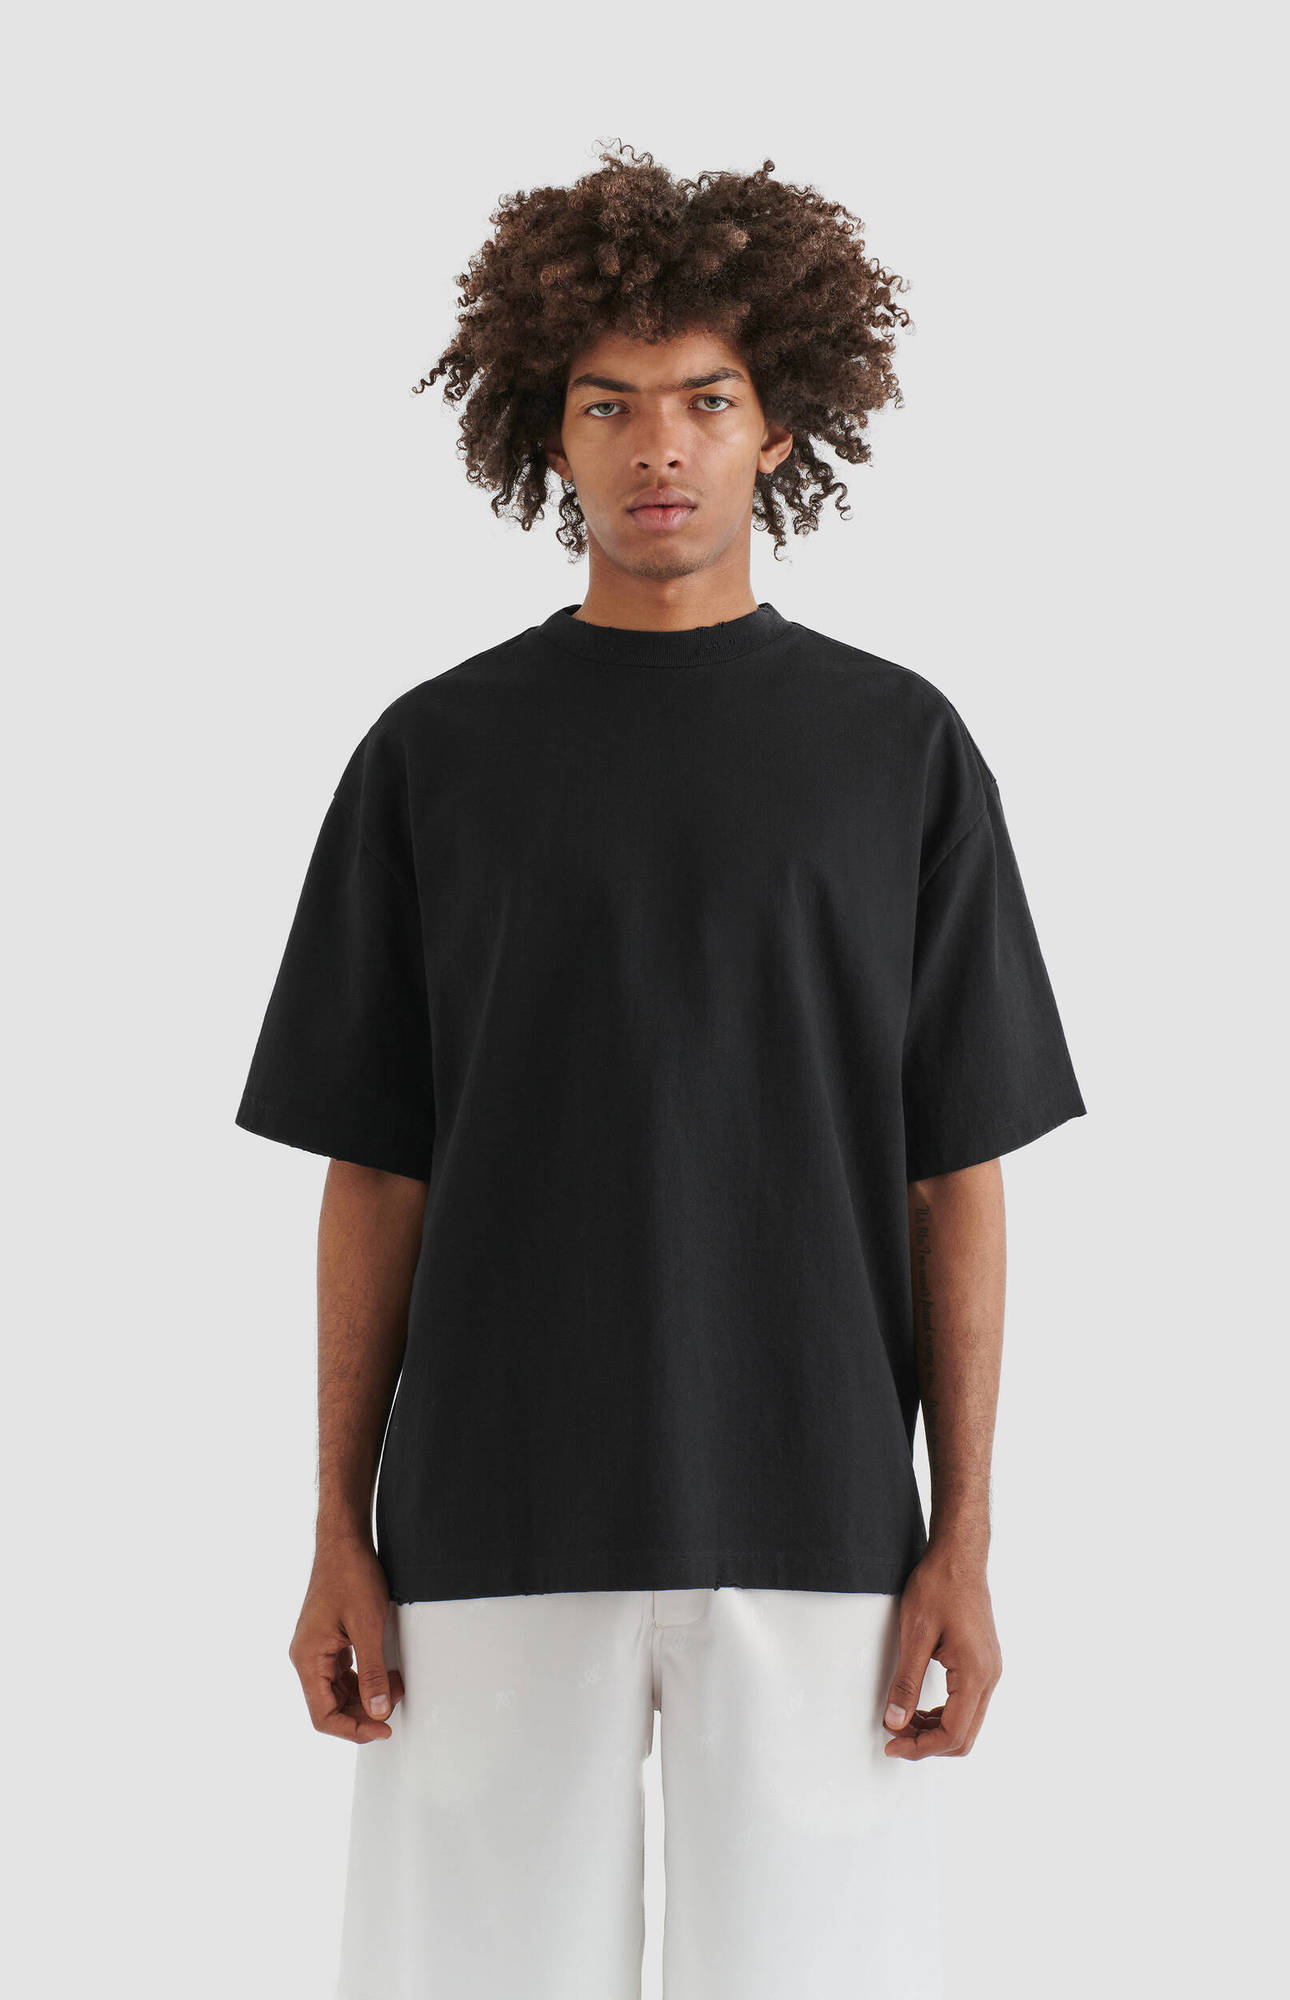 AXEL ARIGATO Series Distressed T-Shirt in Black